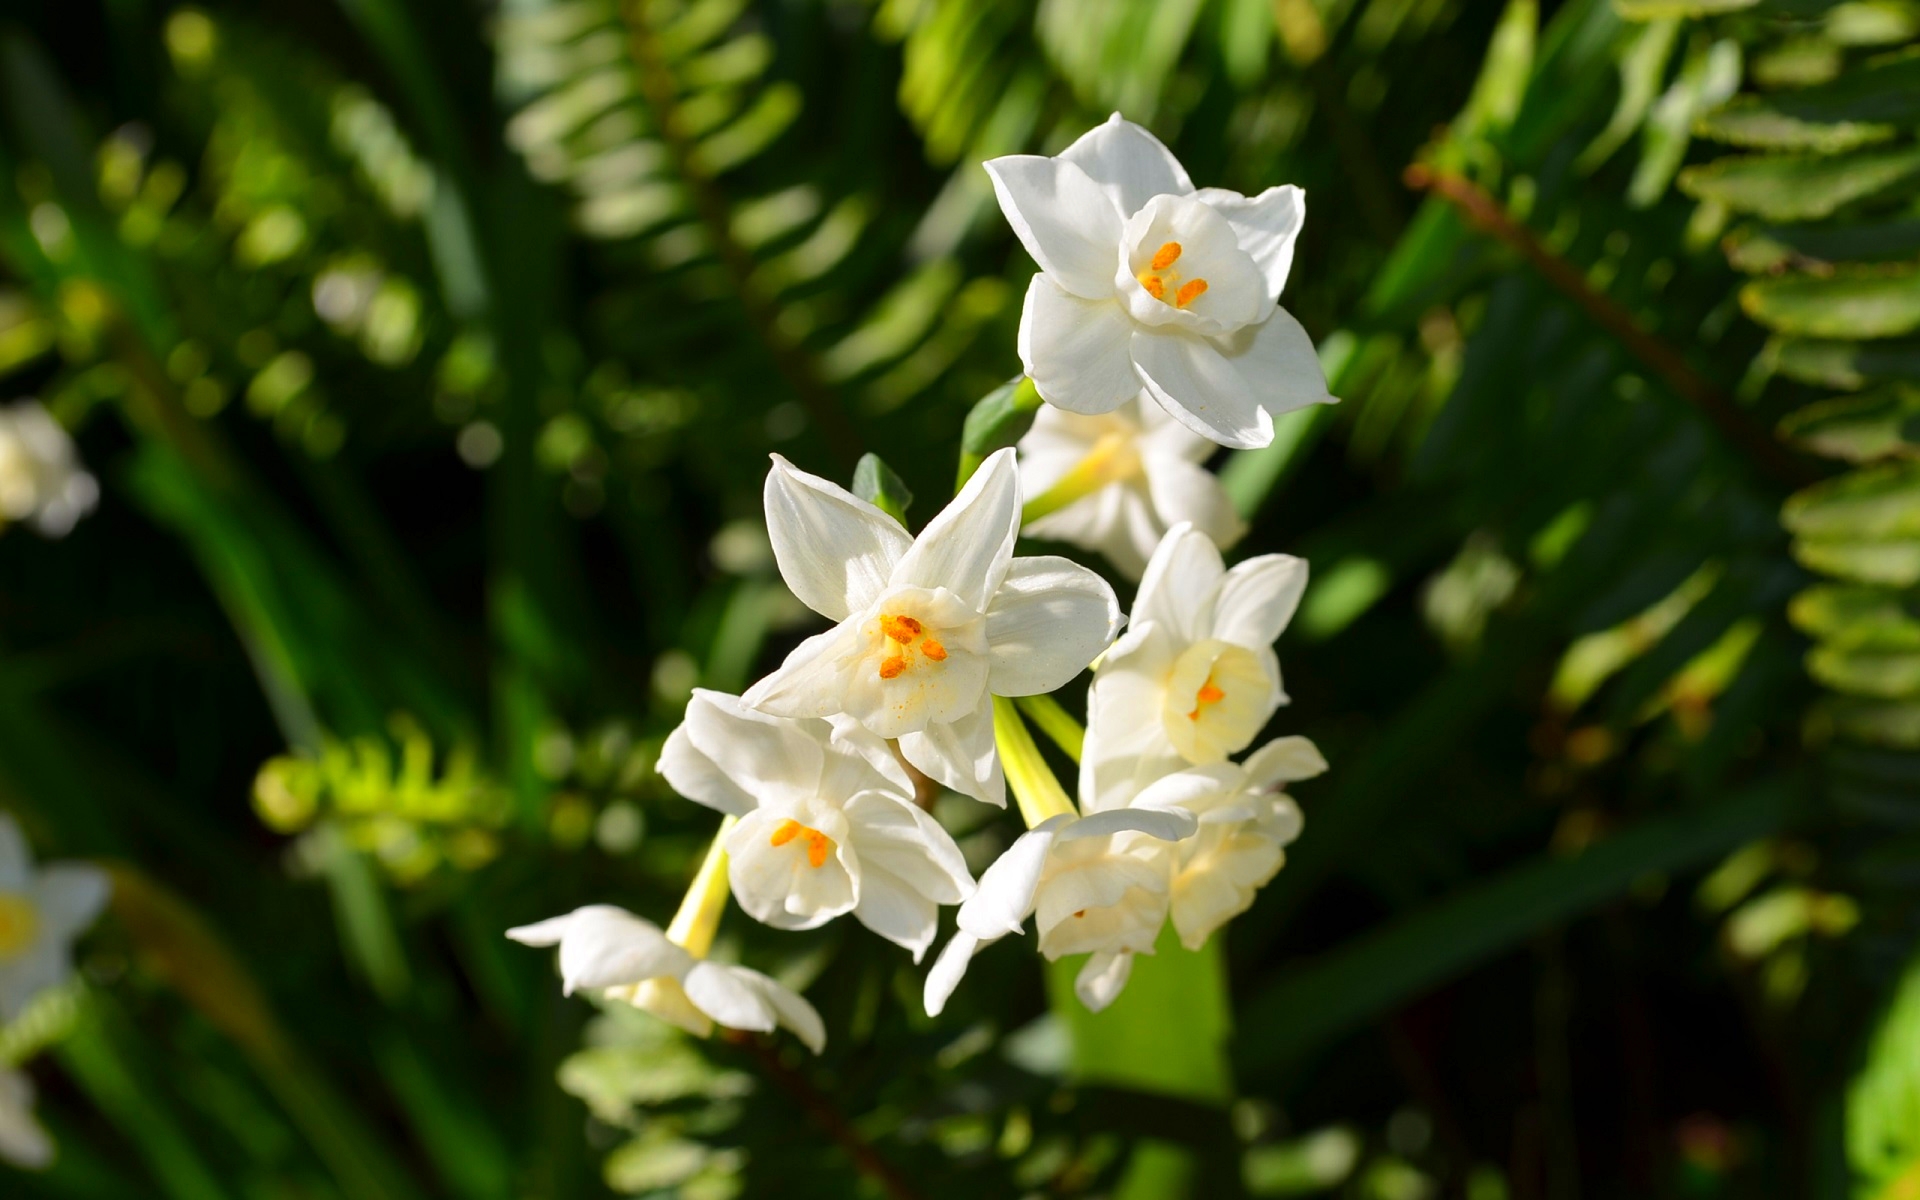 earth, daffodil, blur, flower, narcissus, nature, paperwhite narcissus, white flower, white, flowers